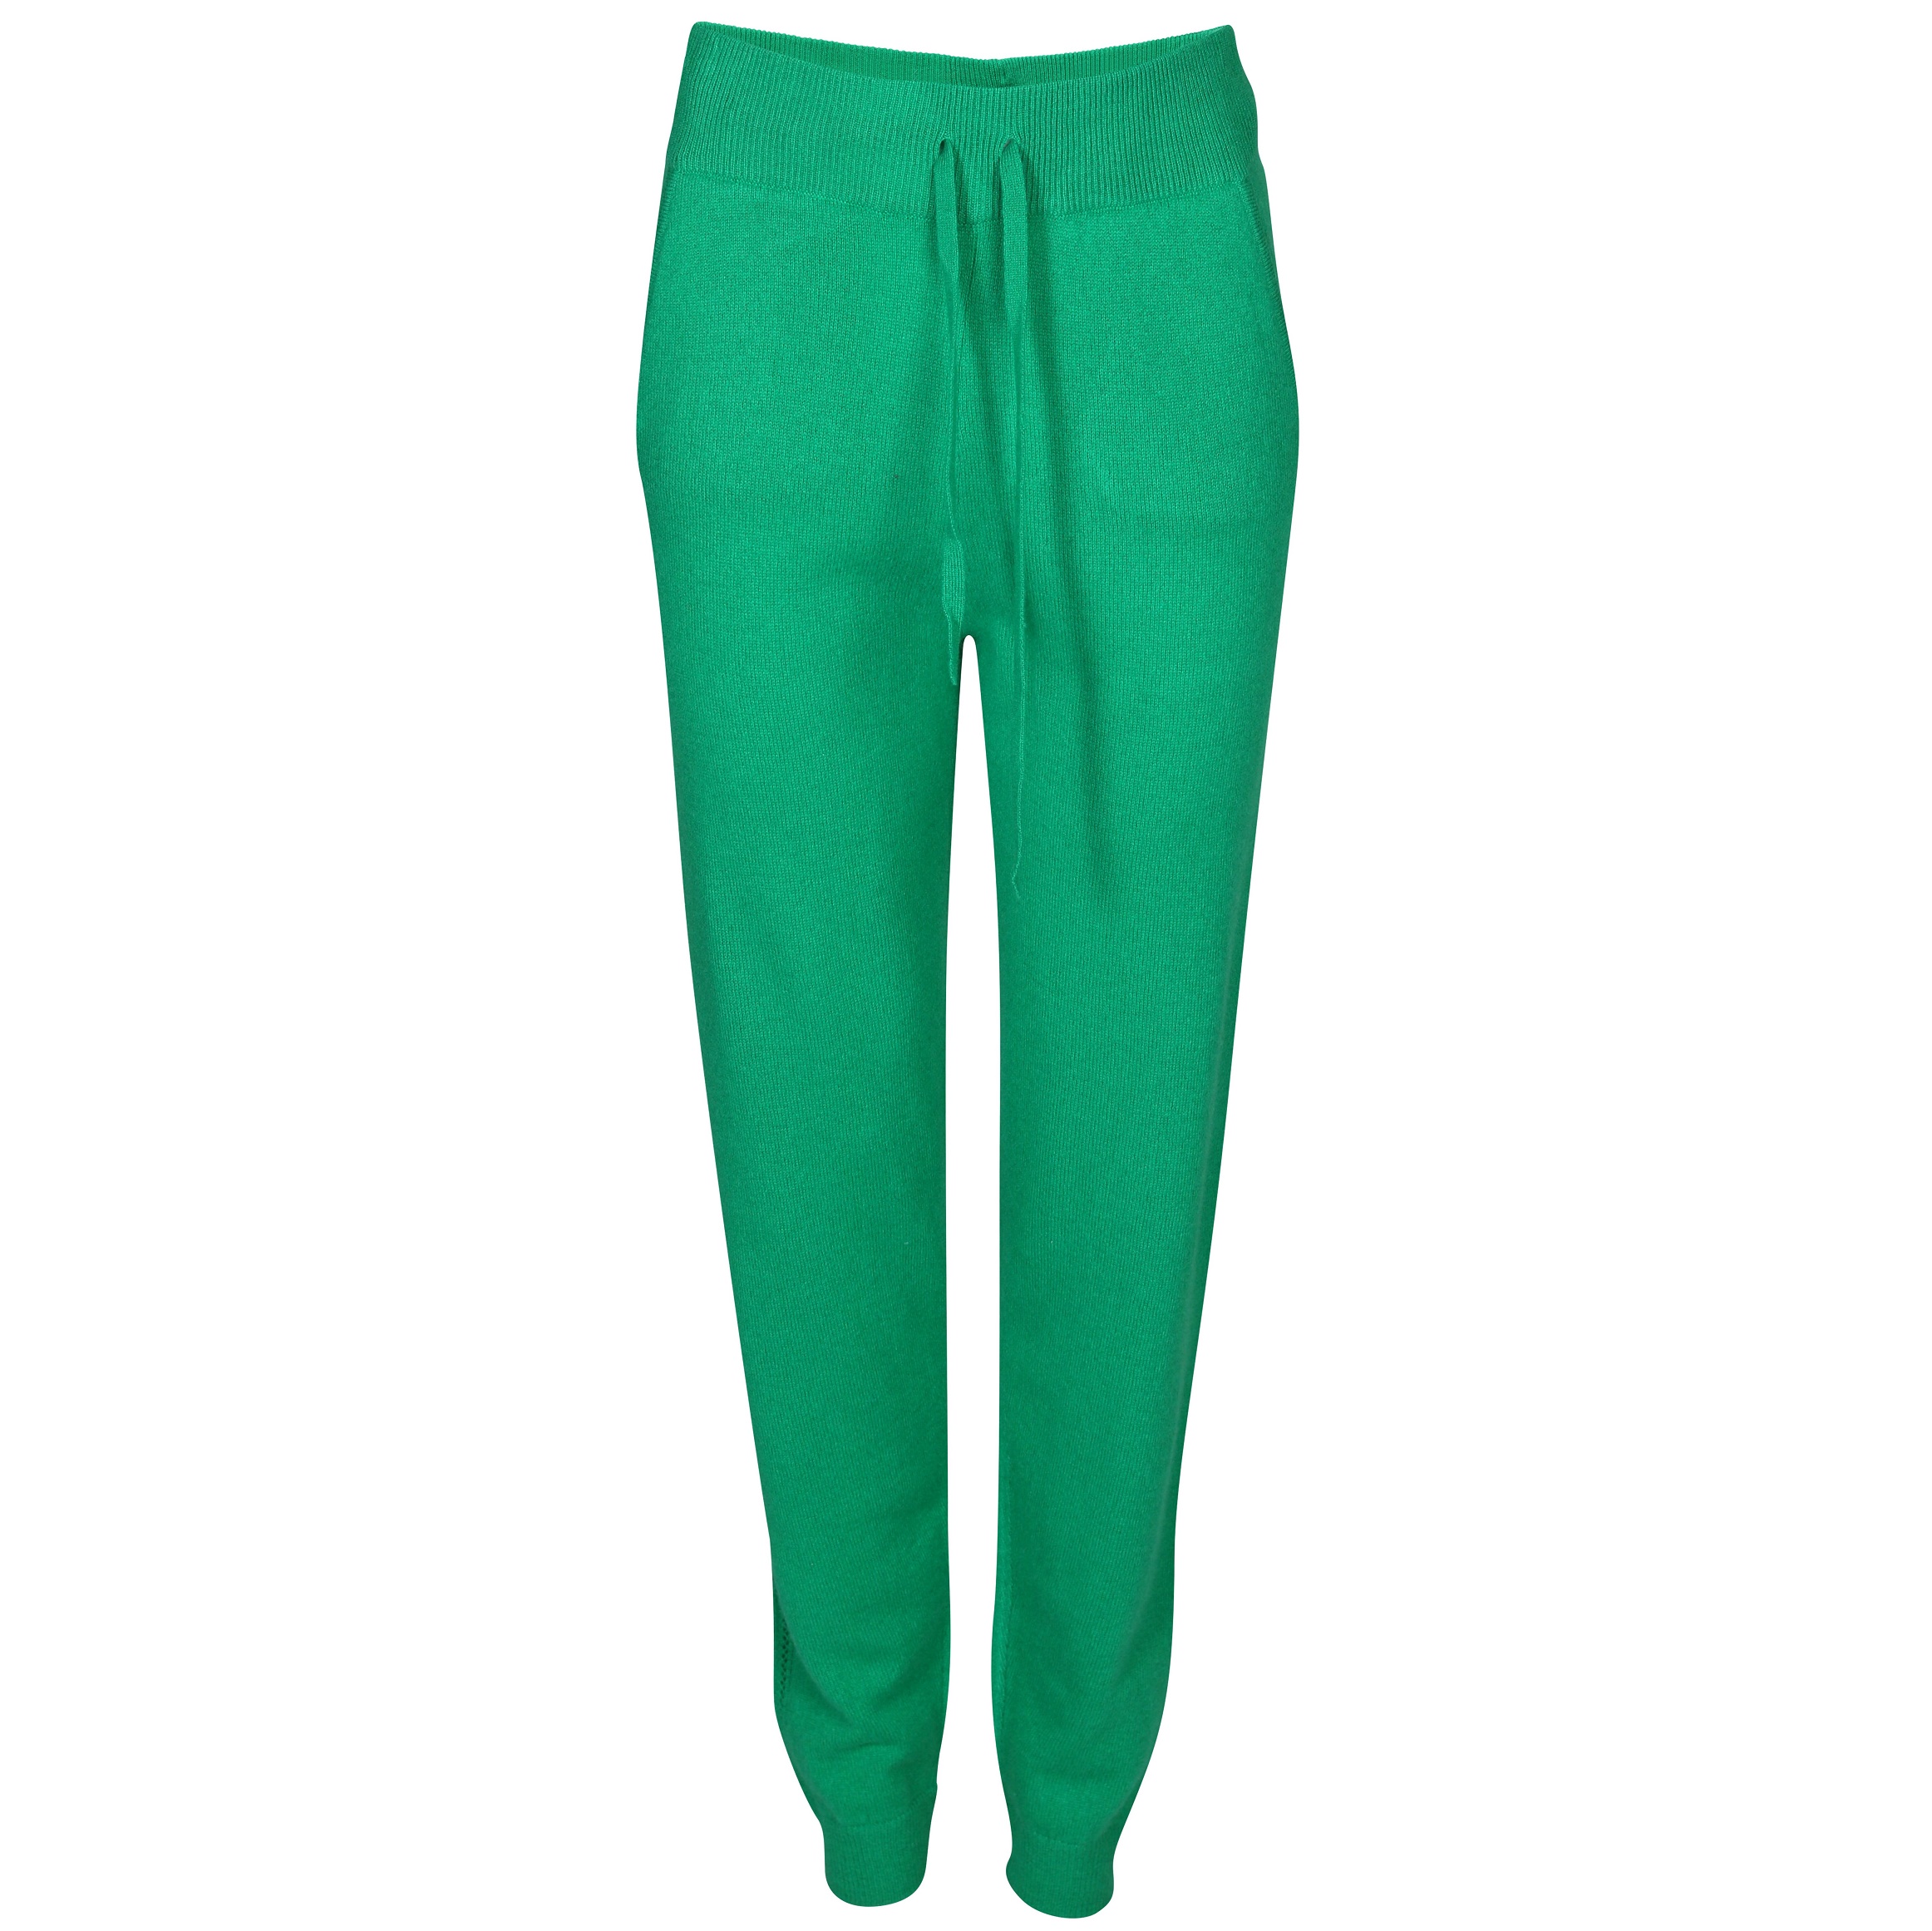 Absolut Cashmere Oliane Jogging Pant in Imperial